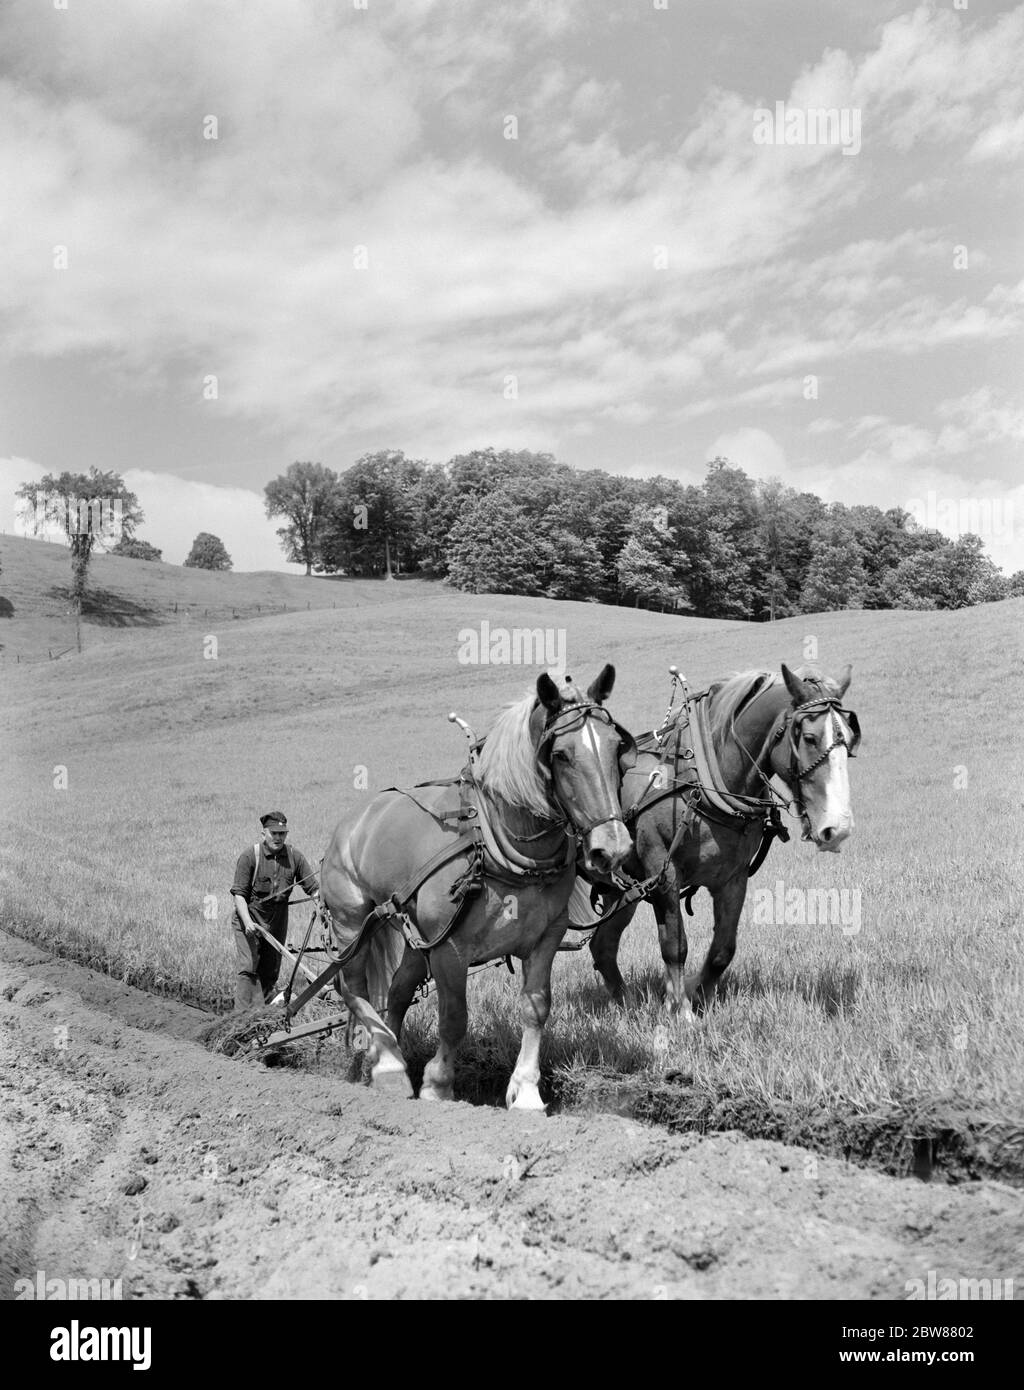 1940s ELDERLY FARMER TRAILING BEHIND PAIR OF DRAFT HORSES PLOWING NEW ENGLAND FIELD USA - f10944 HEL001 HARS MAMMALS STRENGTH PLOW FARMERS POWERFUL PLOWING OCCUPATIONS DRAFT COOPERATION MAMMAL NEW ENGLAND TOGETHERNESS TRAILING BLACK AND WHITE CAUCASIAN ETHNICITY OLD FASHIONED Stock Photo